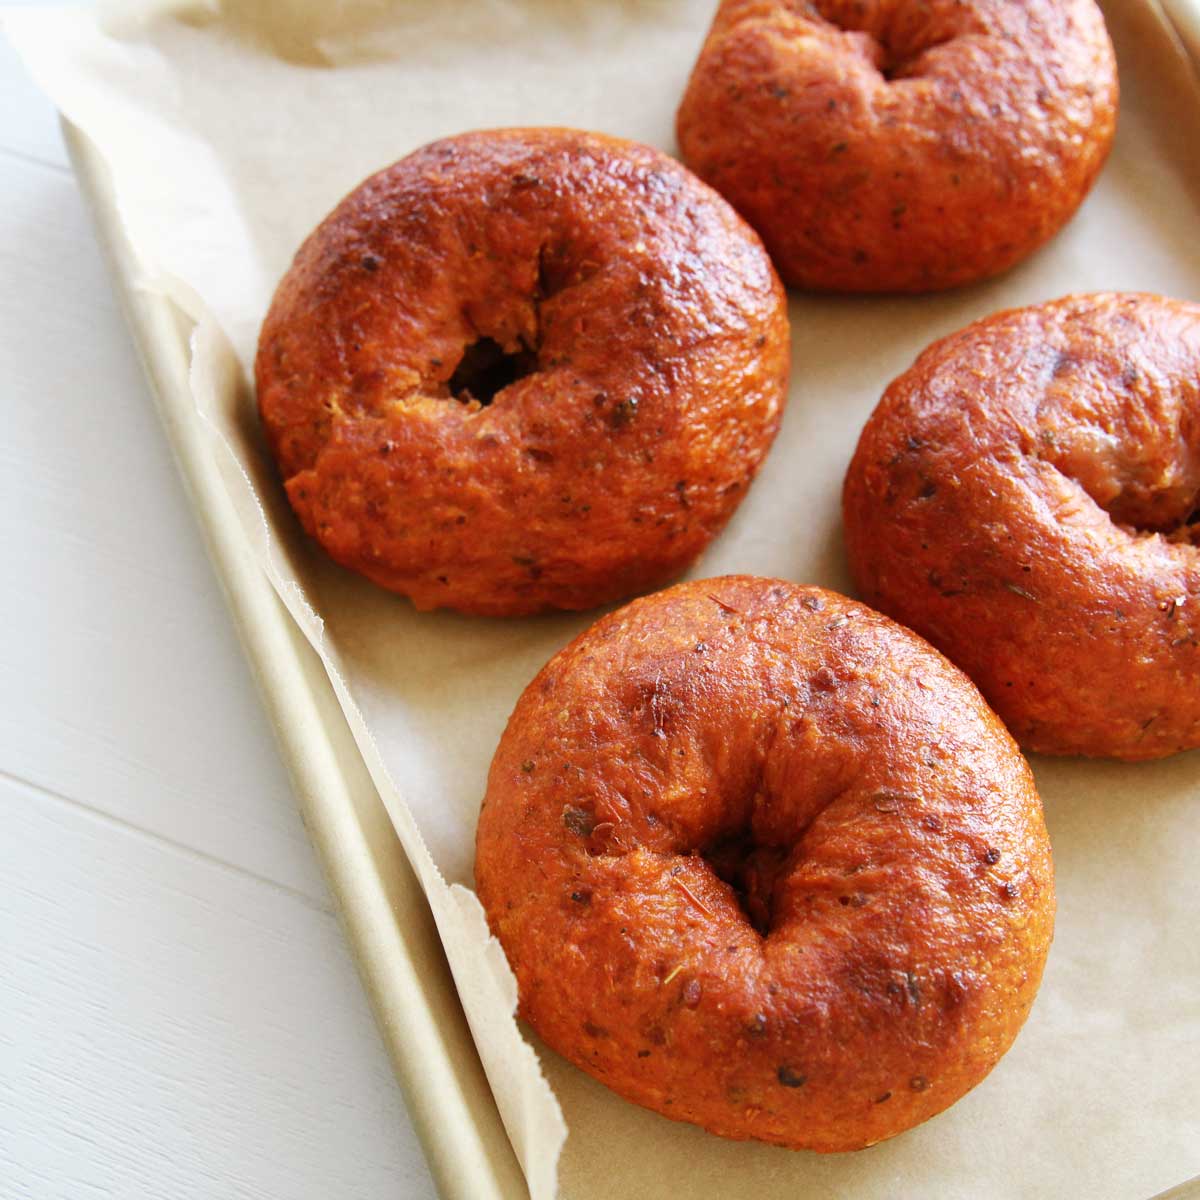 Game-changing Pizza Bagels! Overnight Tomato Bagels Stuffed With Cheese - Pizza Bagels